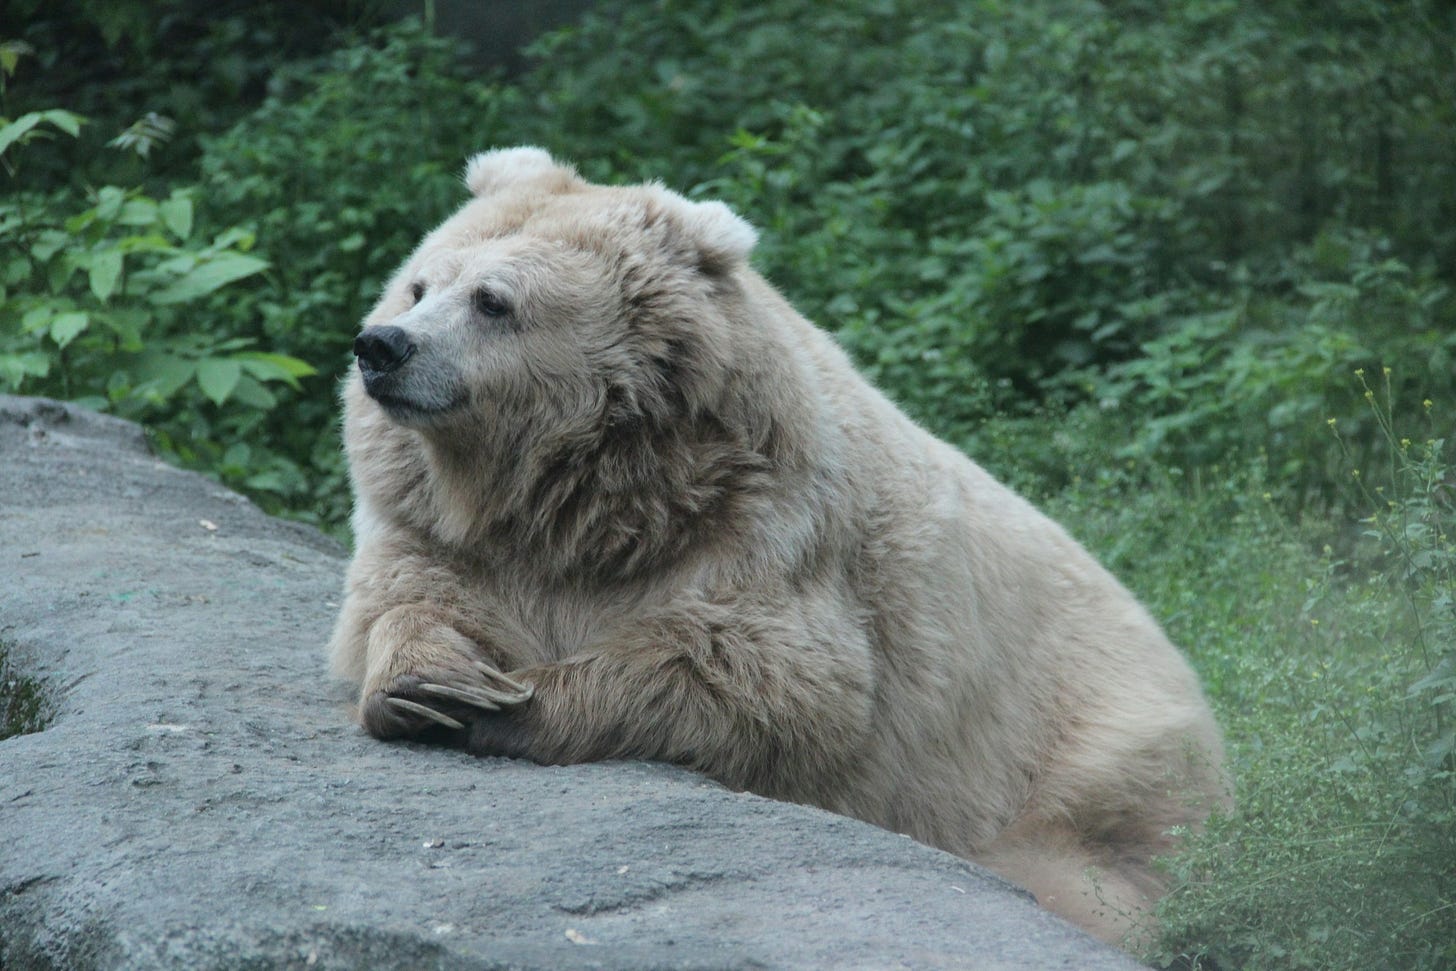 A beige bear rests on a rock, paws together, gazing into the distance.